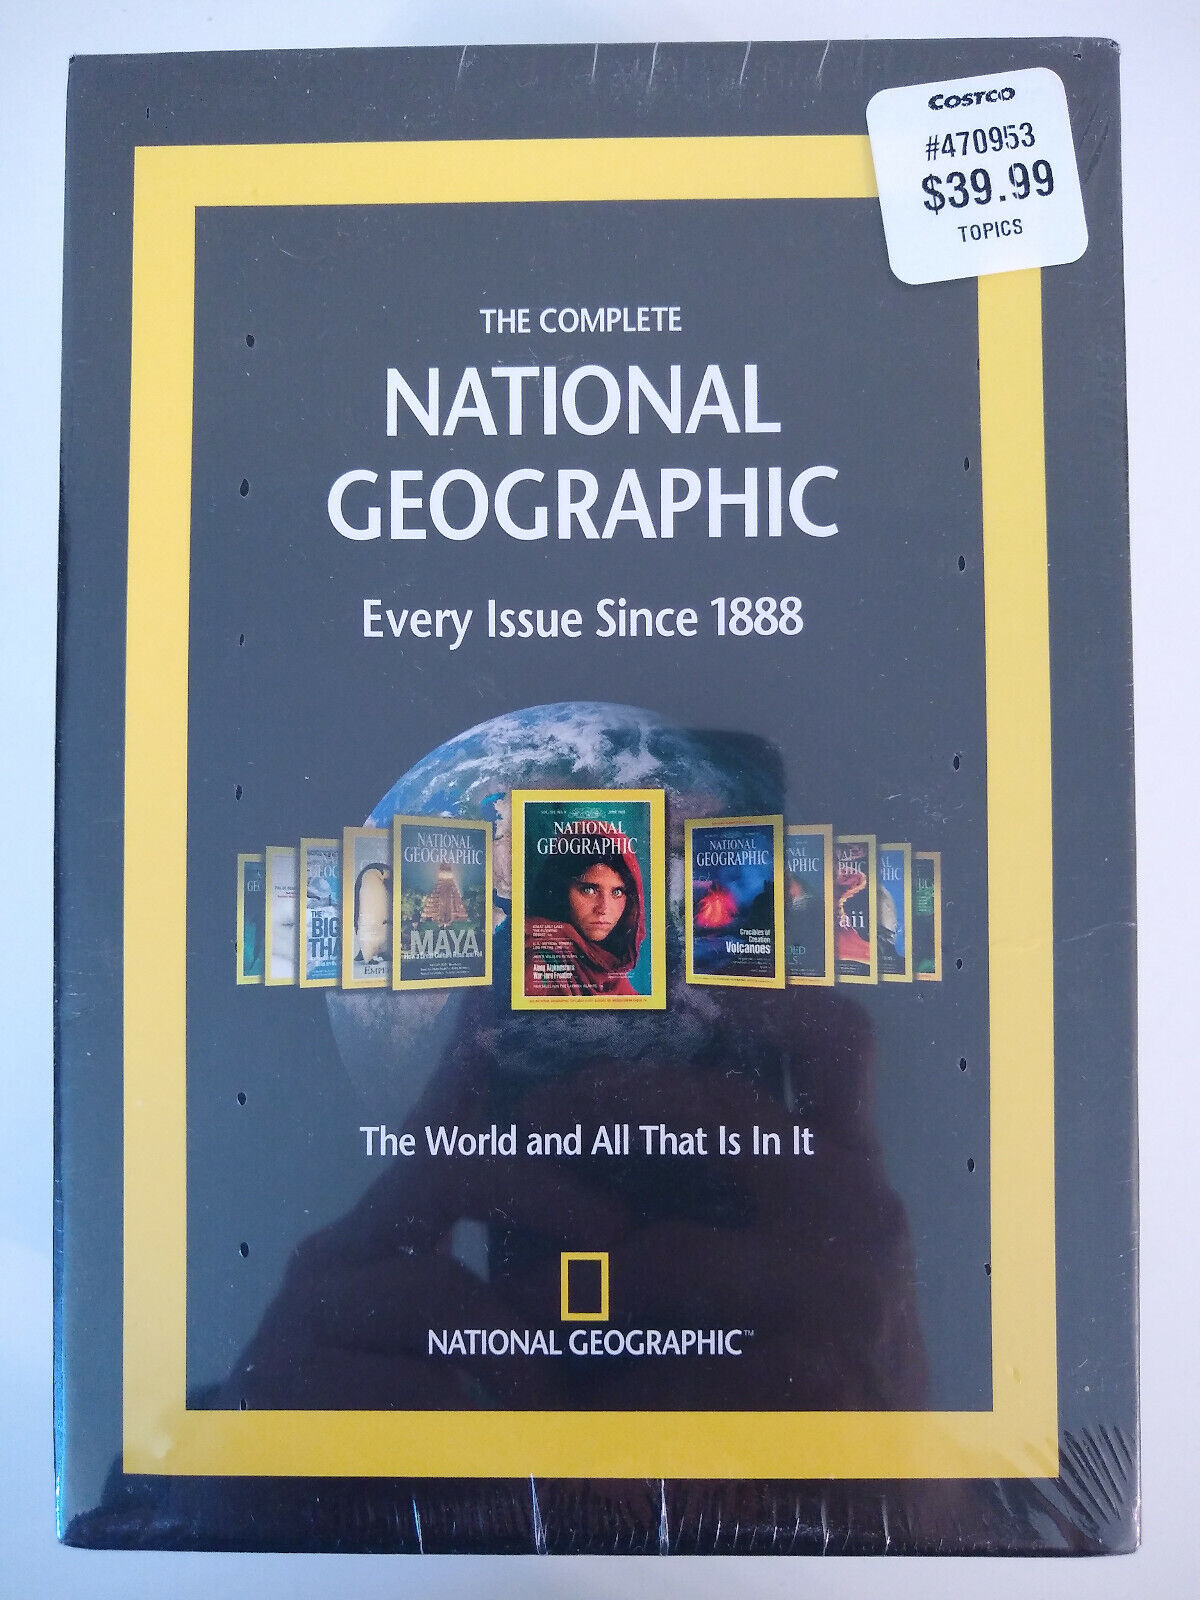 Complete National Geographic: Every Issue Since 1888 (to 2008) DVD PC NEW